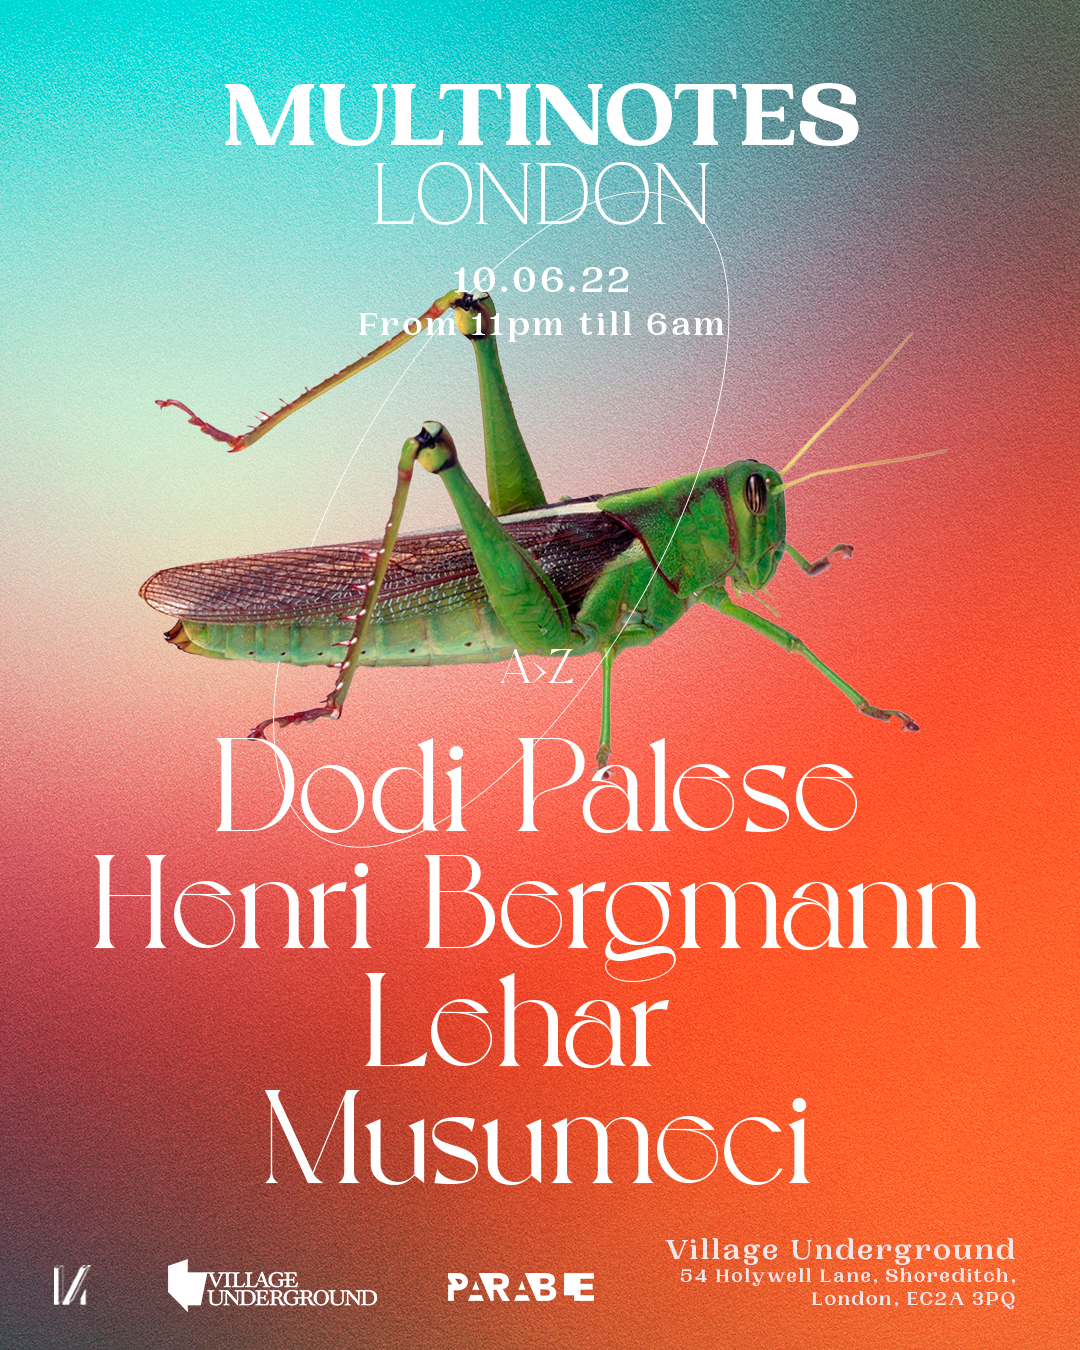 Parable presents: Multinotes London with Lehar, Musumeci & guests - Flyer front